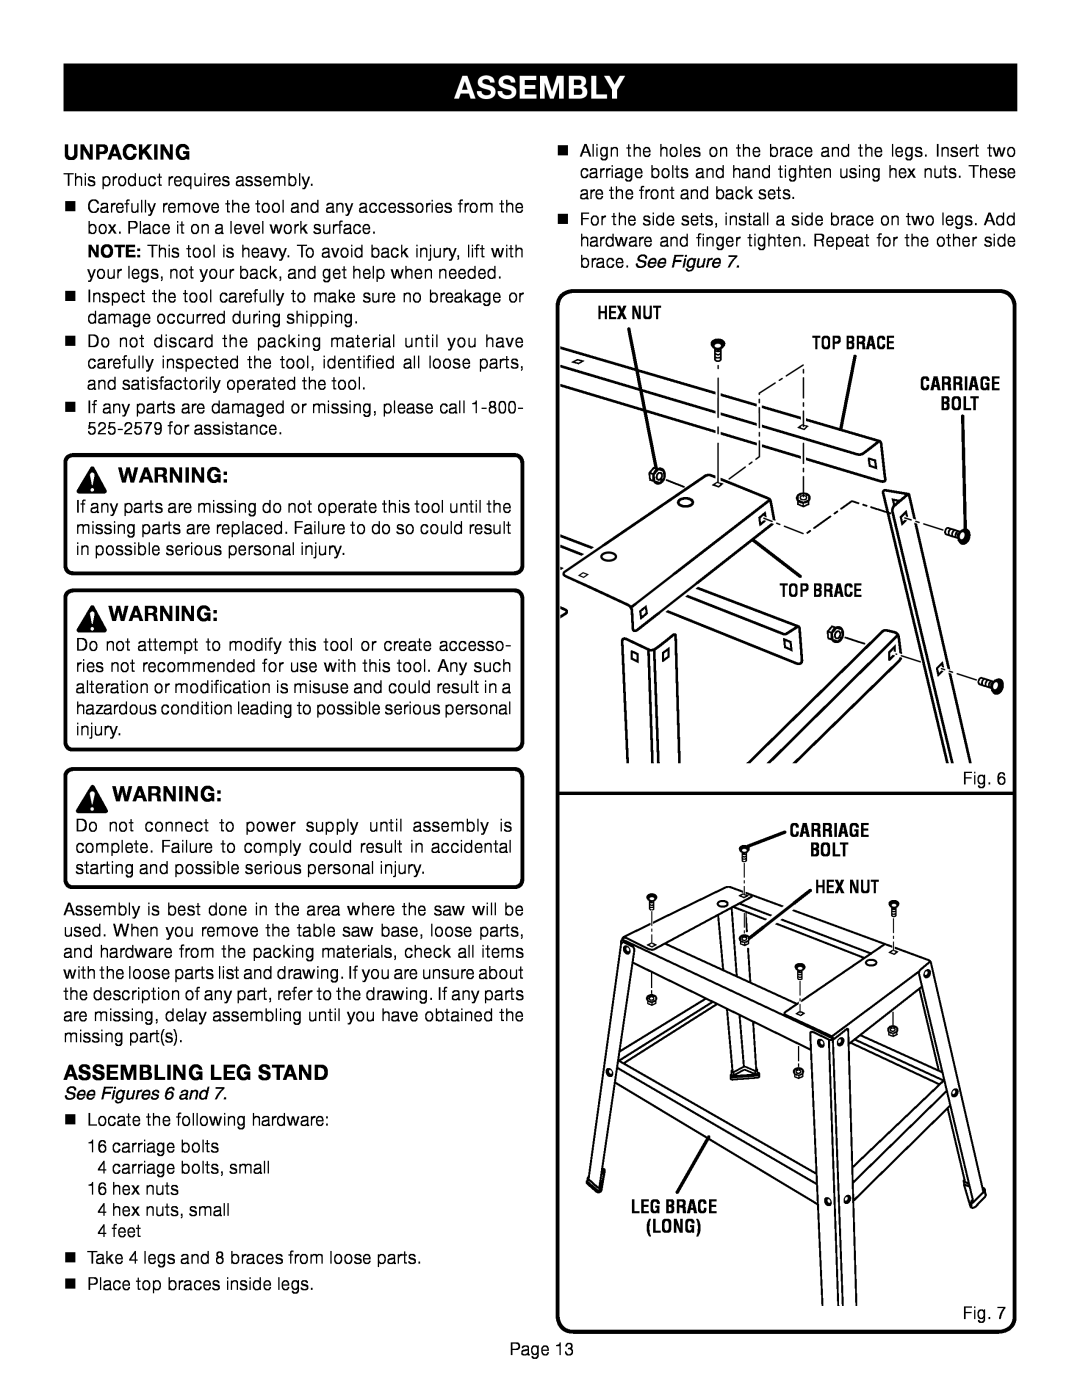 Ryobi BS1001SV manual Assembly, Carriage Bolt, Leg Brace Long, Hex Nut Top Brace, See Figures 6 and 